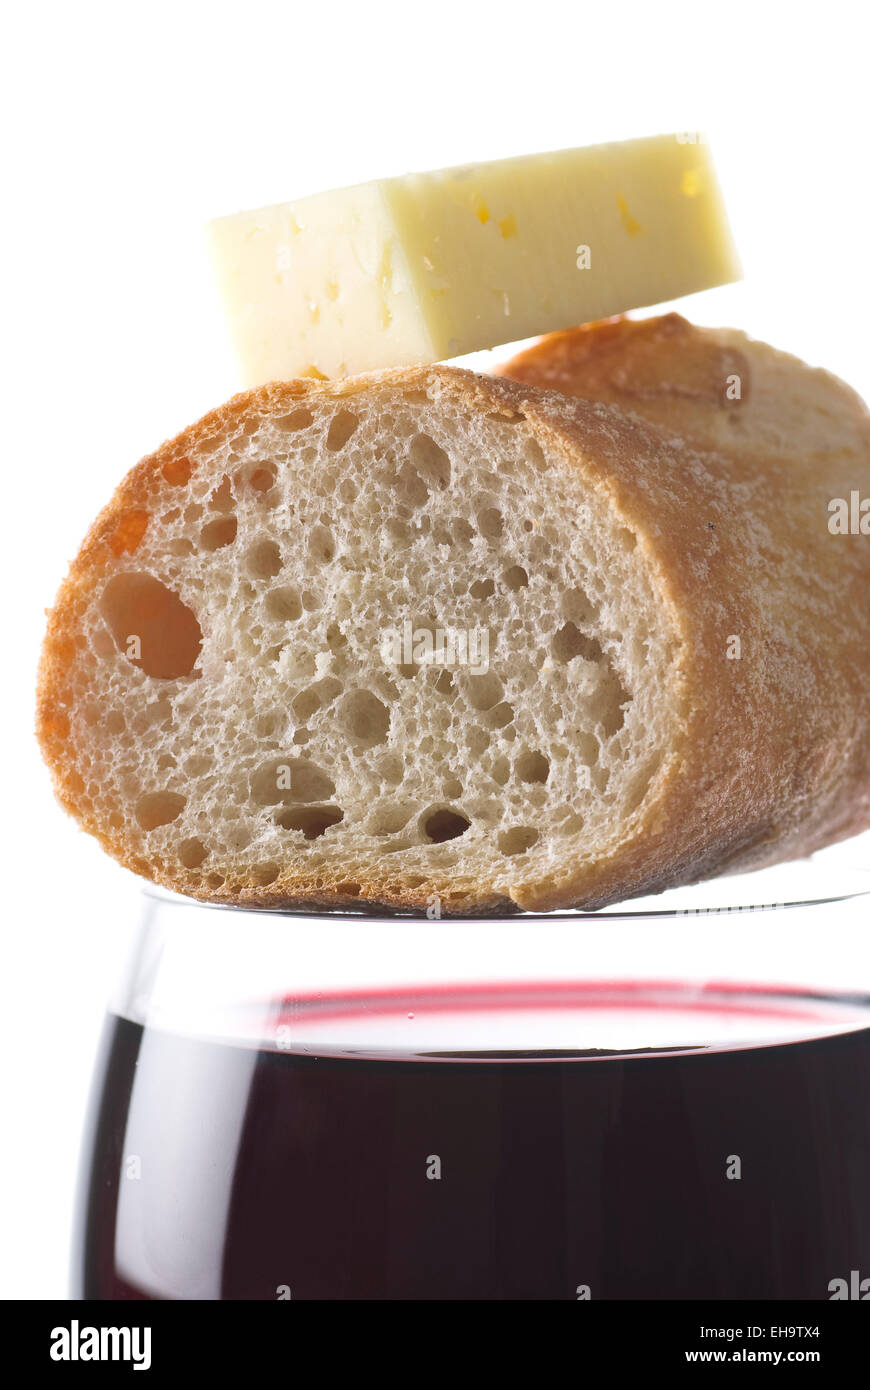 A glass of wine with bread and cheese on top. Stock Photo